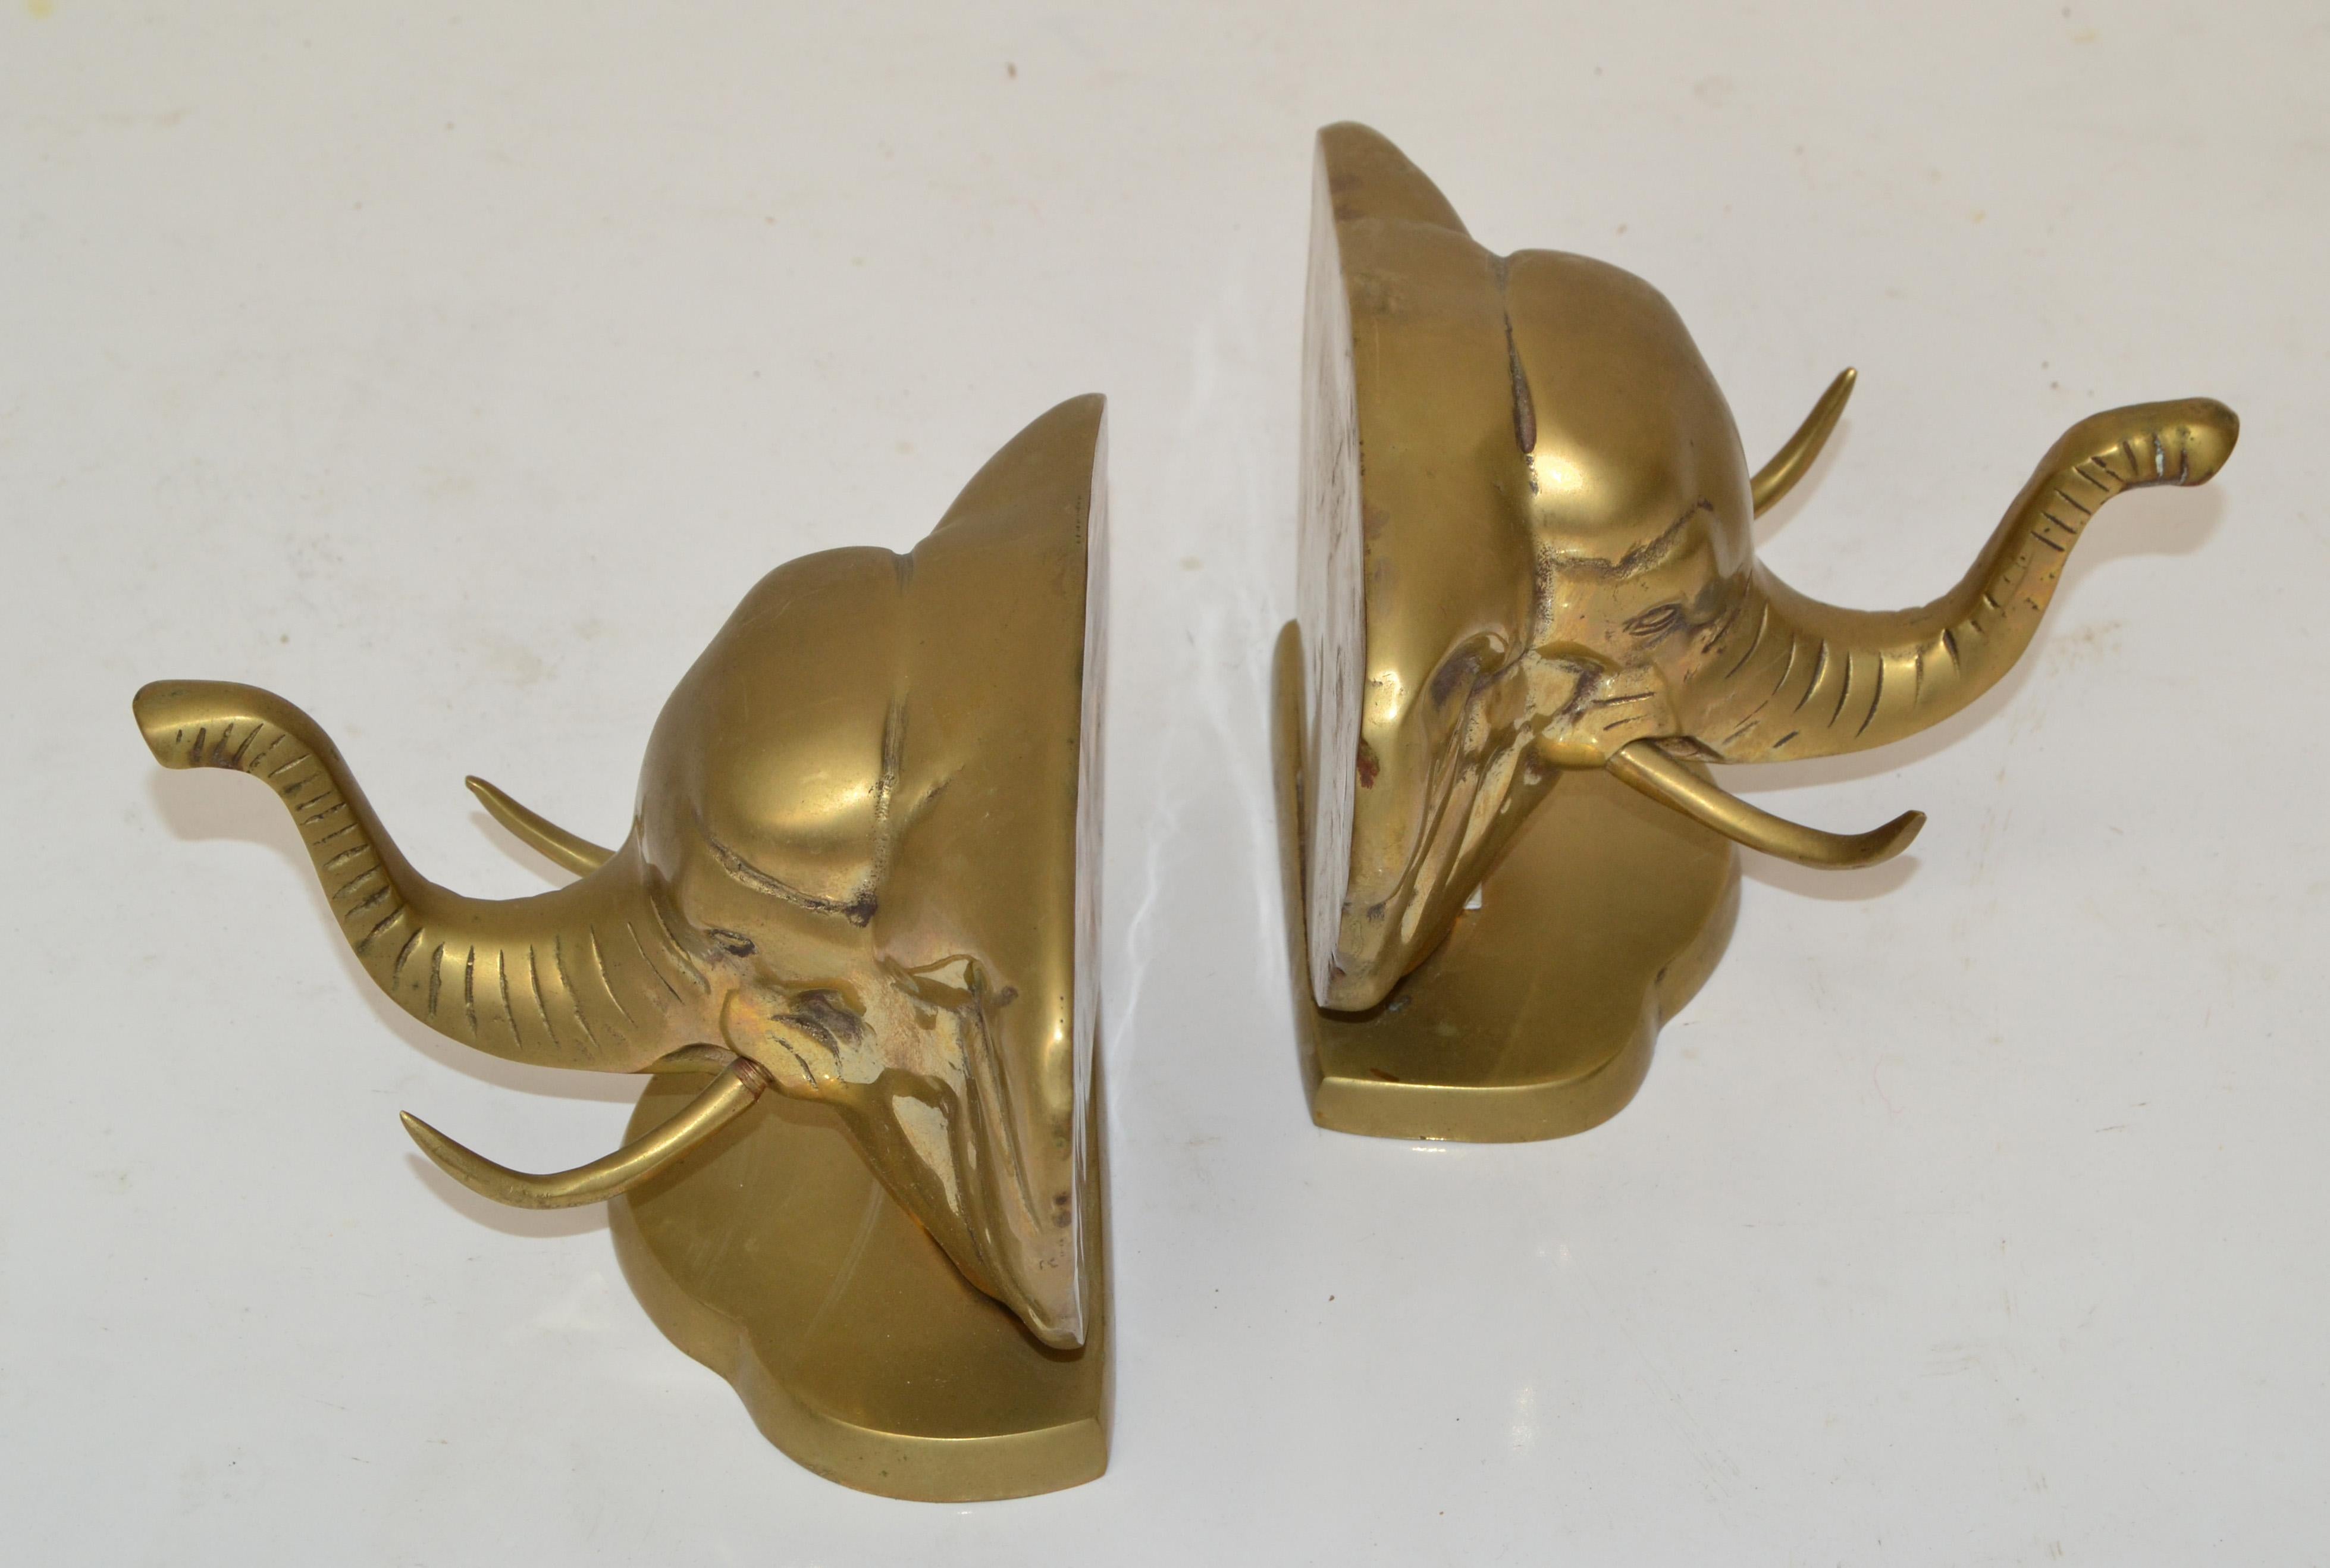 20th Century Vintage Handcrafted Brass Elephant Head Bookends, Pair For Sale